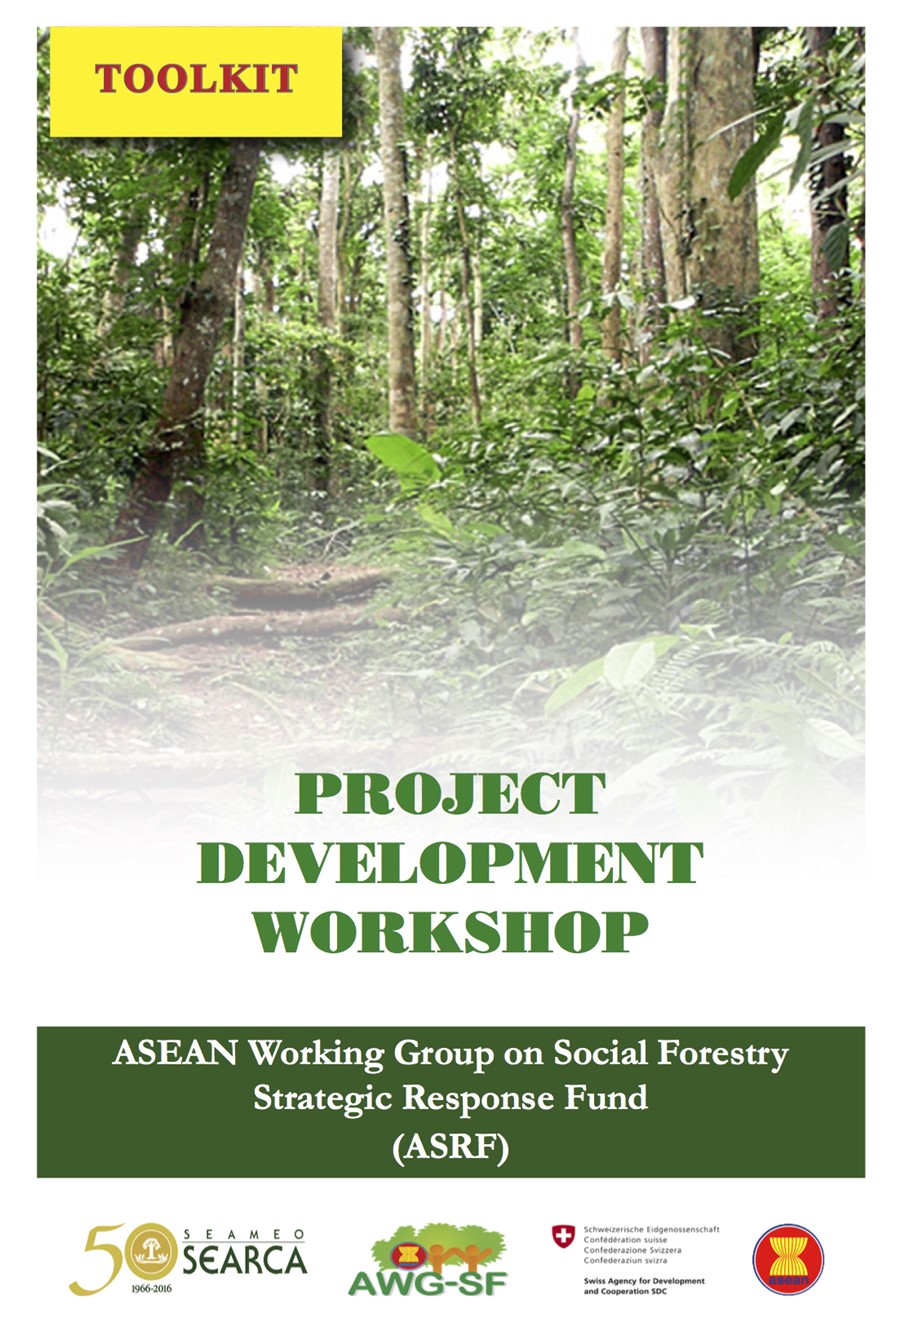 searca-to-pilot-test-the-asrf-project-development-toolkit-and-validate-the-social-forestry-gap-analysis-lao-pdr-01